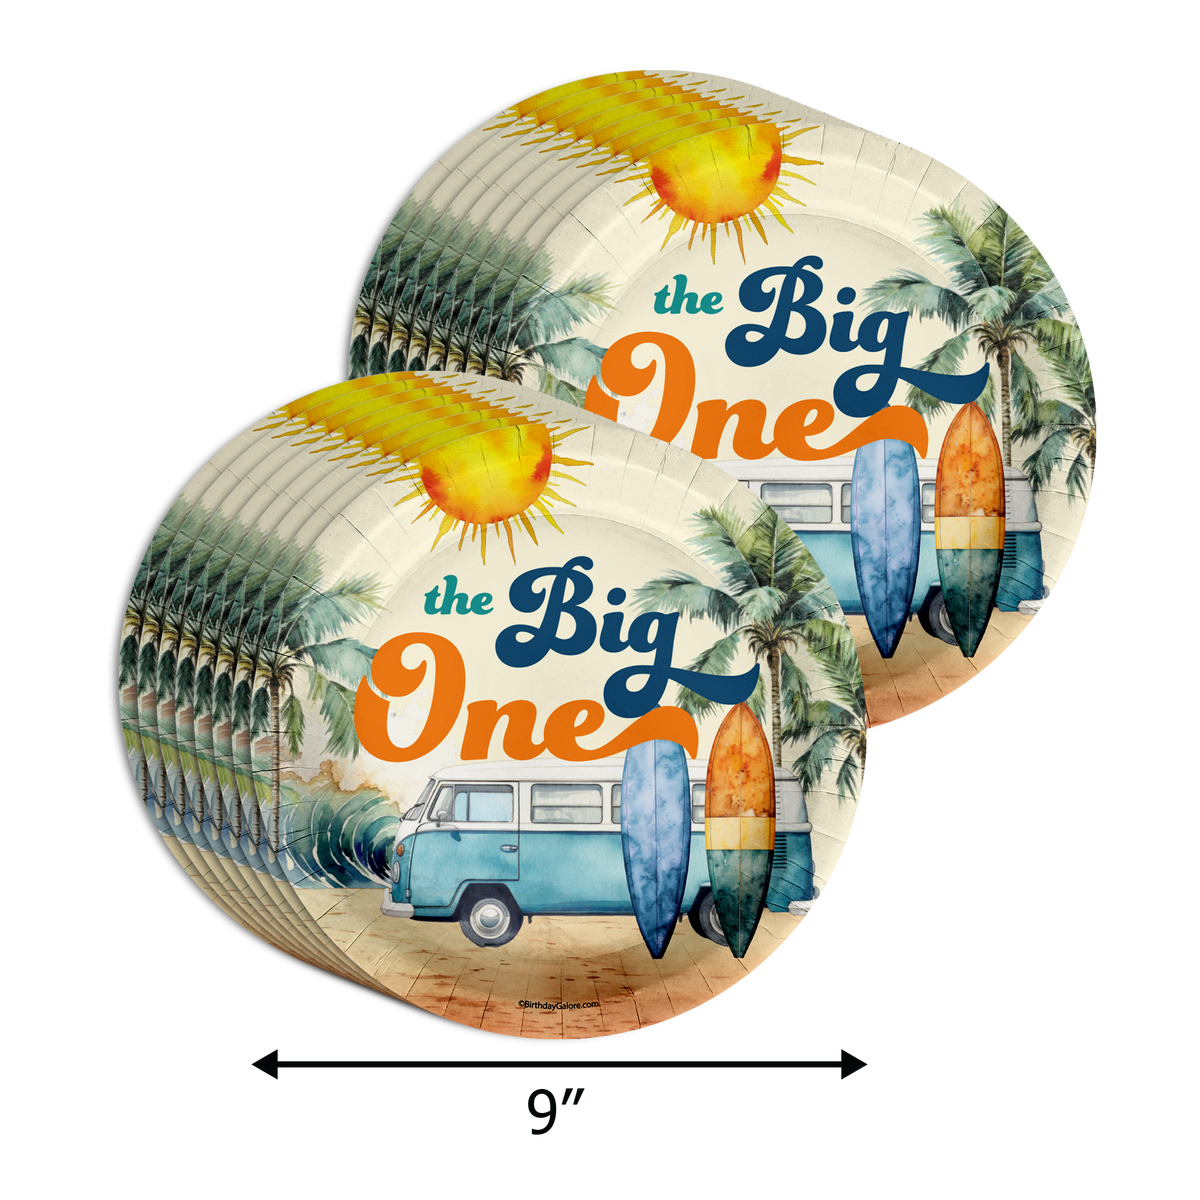 The Big One Surfing 1st Birthday Party Supplies 64 Piece Tableware Set Includes Large 9" Paper Plates Dessert Plates, Cups and Napkins Kit for 16